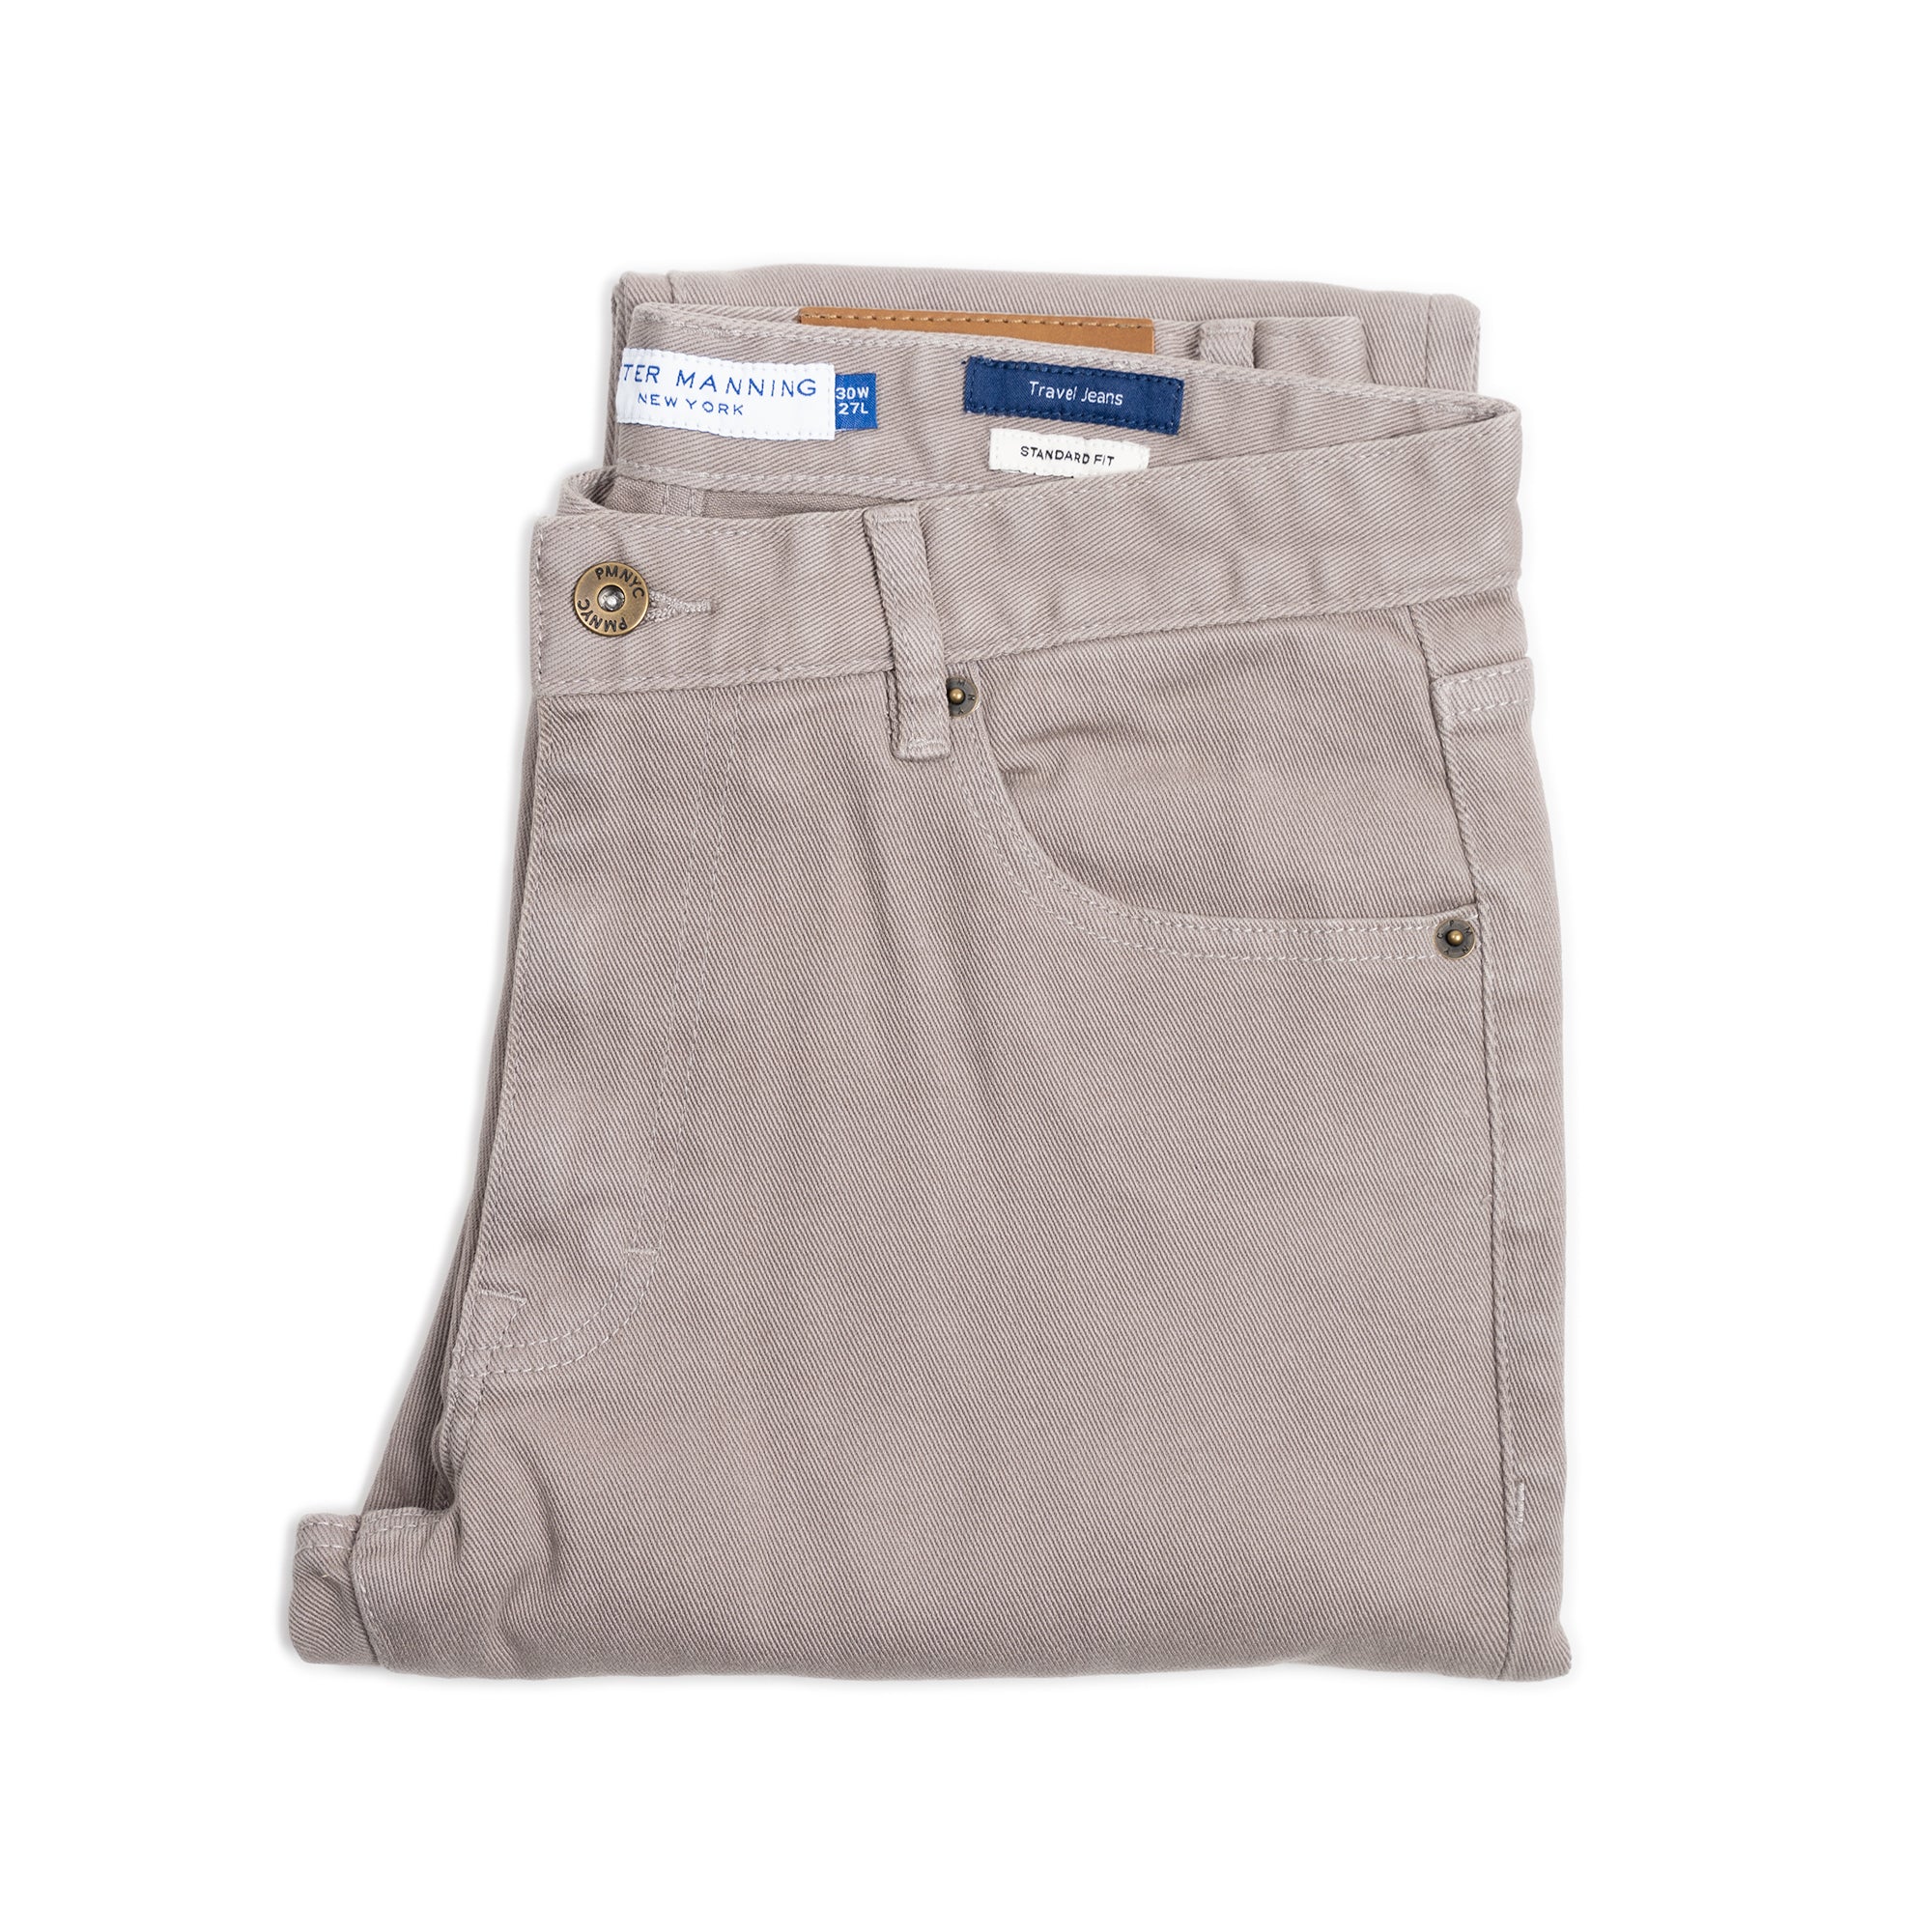 peter manning travel jeans